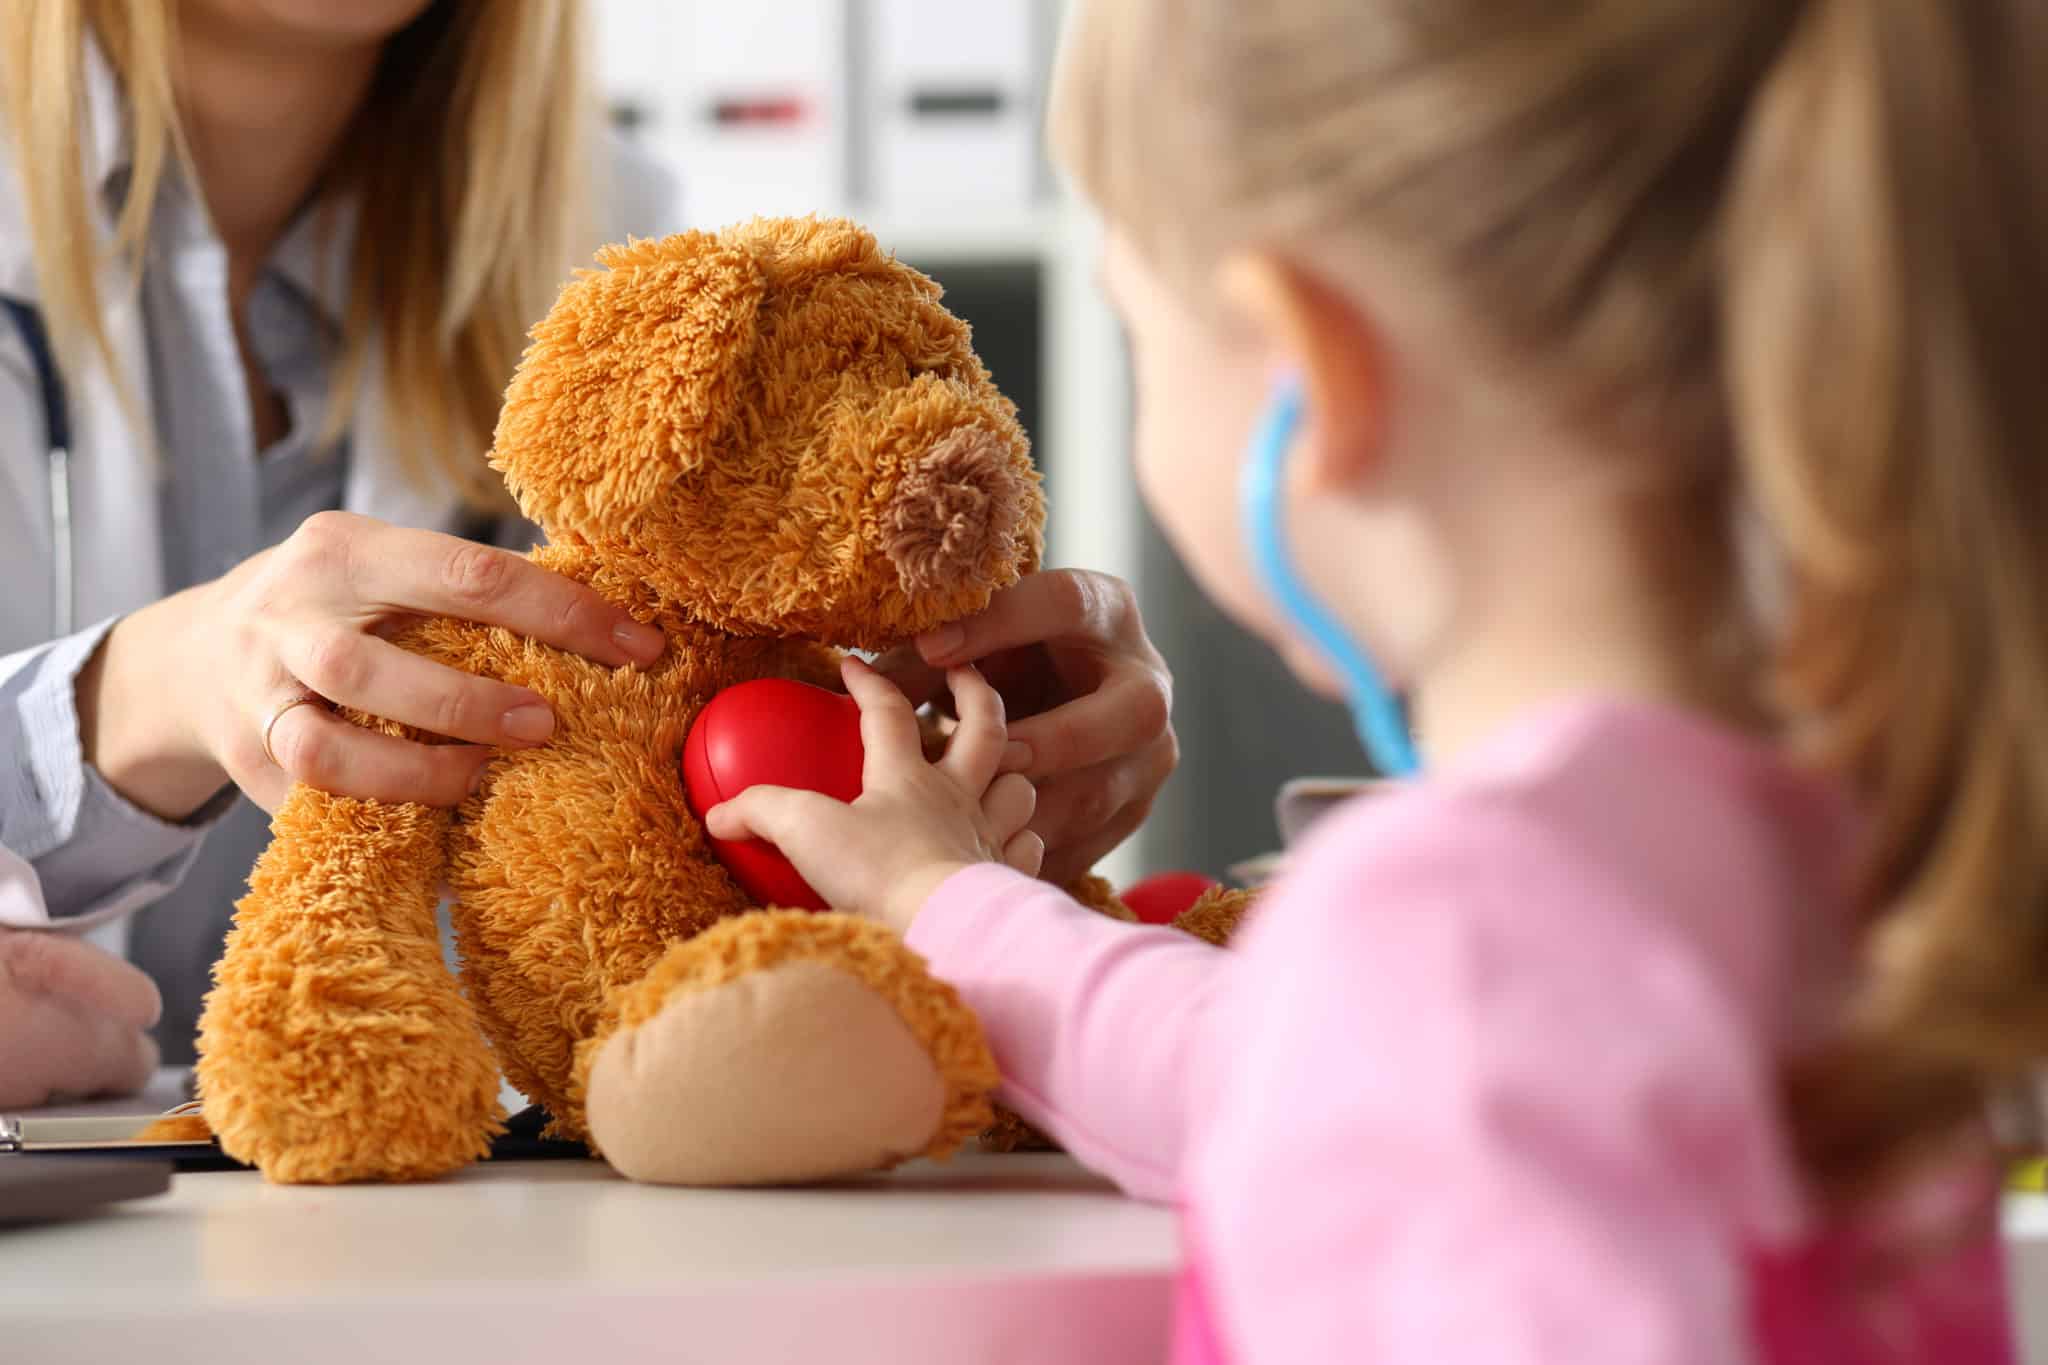 Child using toy stethoscope with teddy bear